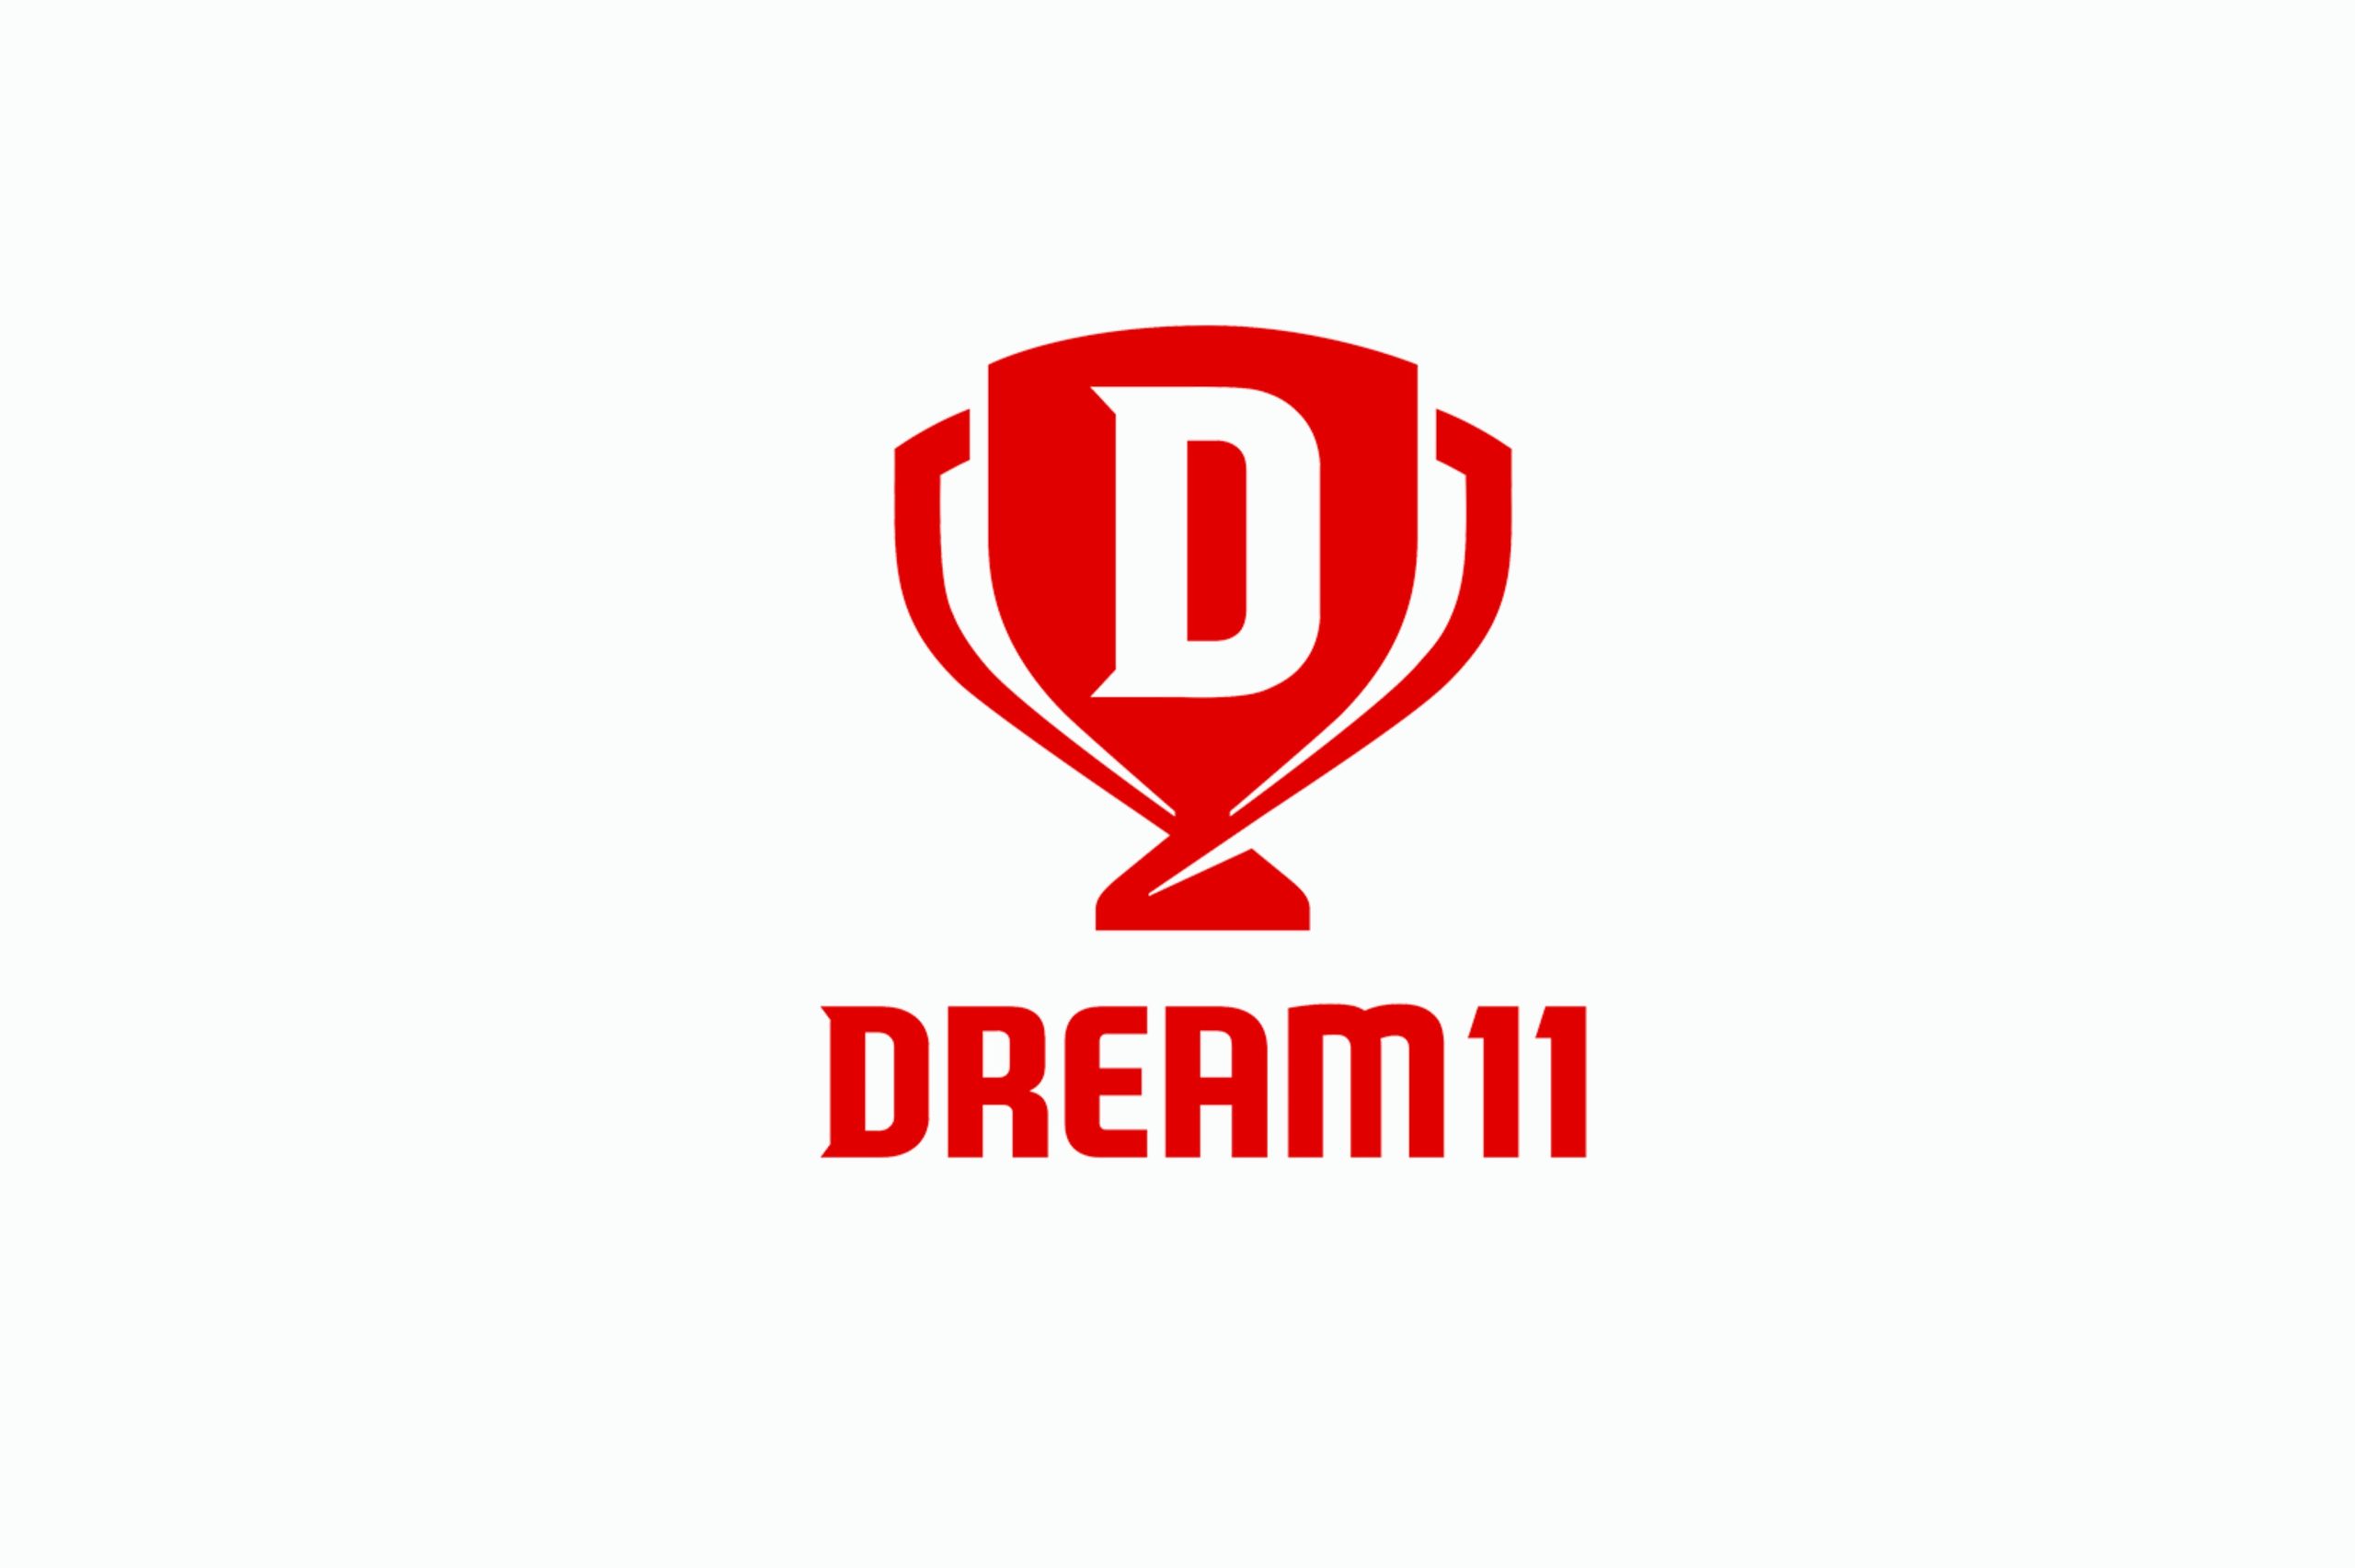 Fans express disappointment over Dream11 logo on India's ODI jersey | G2G  News